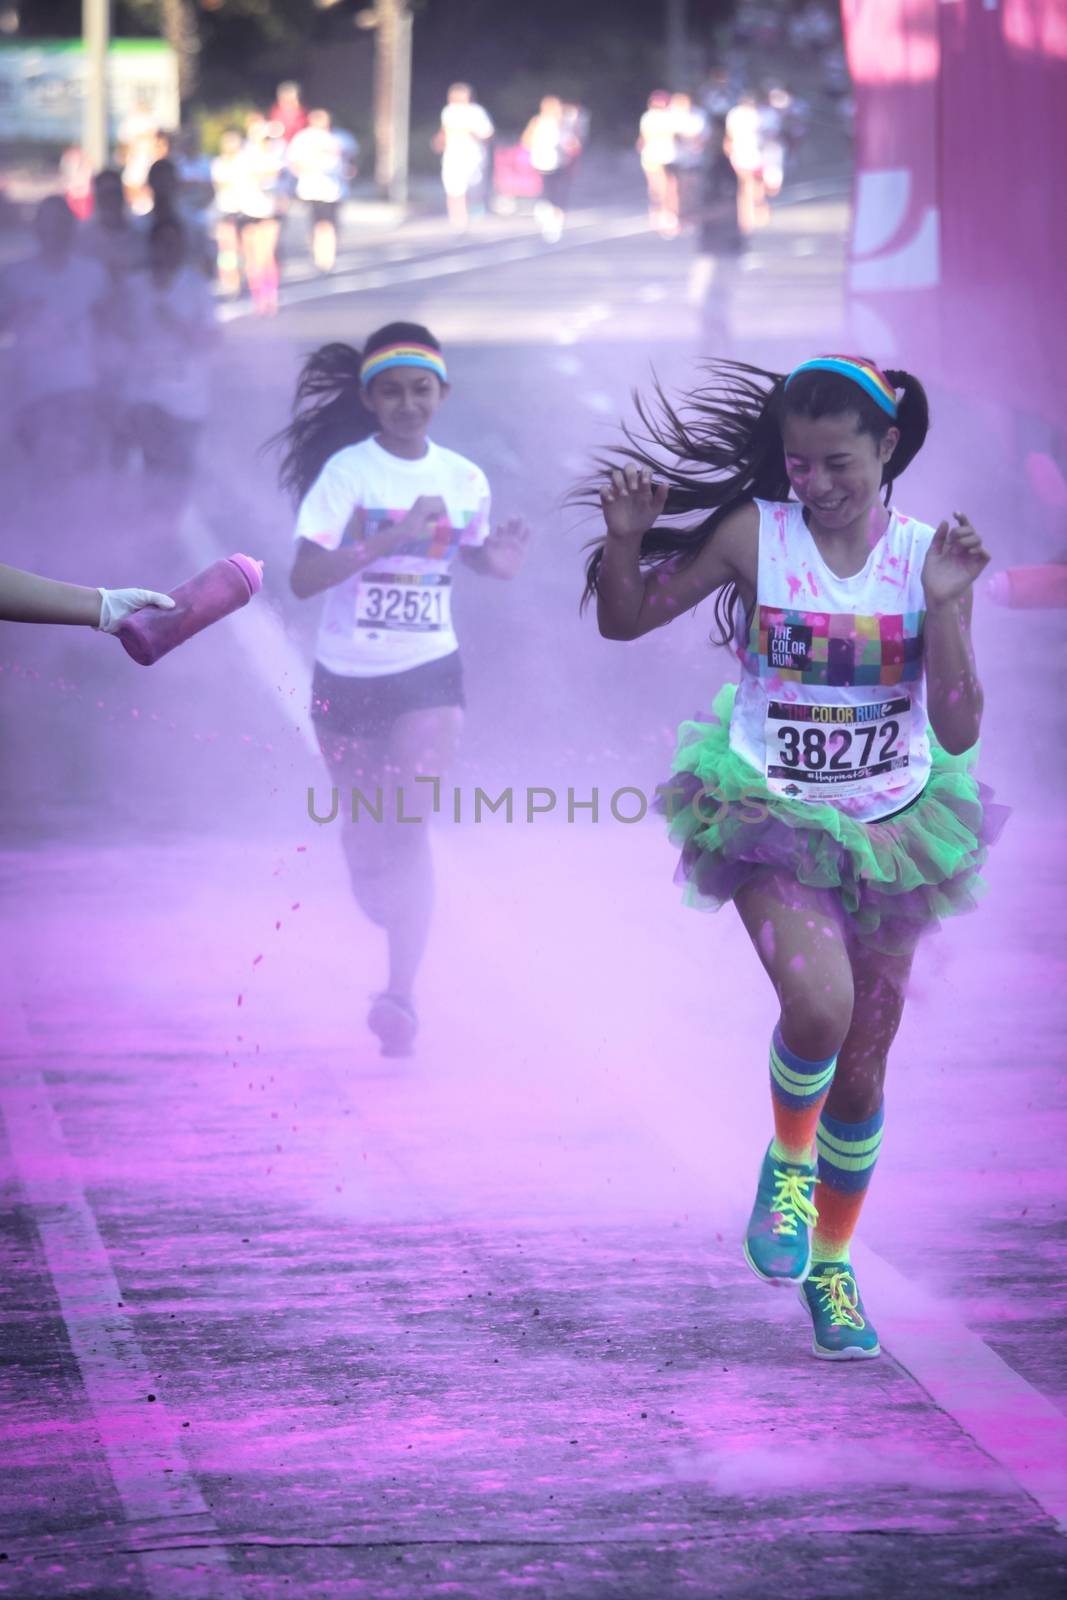 Ventura, CA - OCTOBER 18 : Participants coming through the pink color station at The Color Run 2014 in Ventura. OCTOBER 18, 2014 in Ventura, CA.